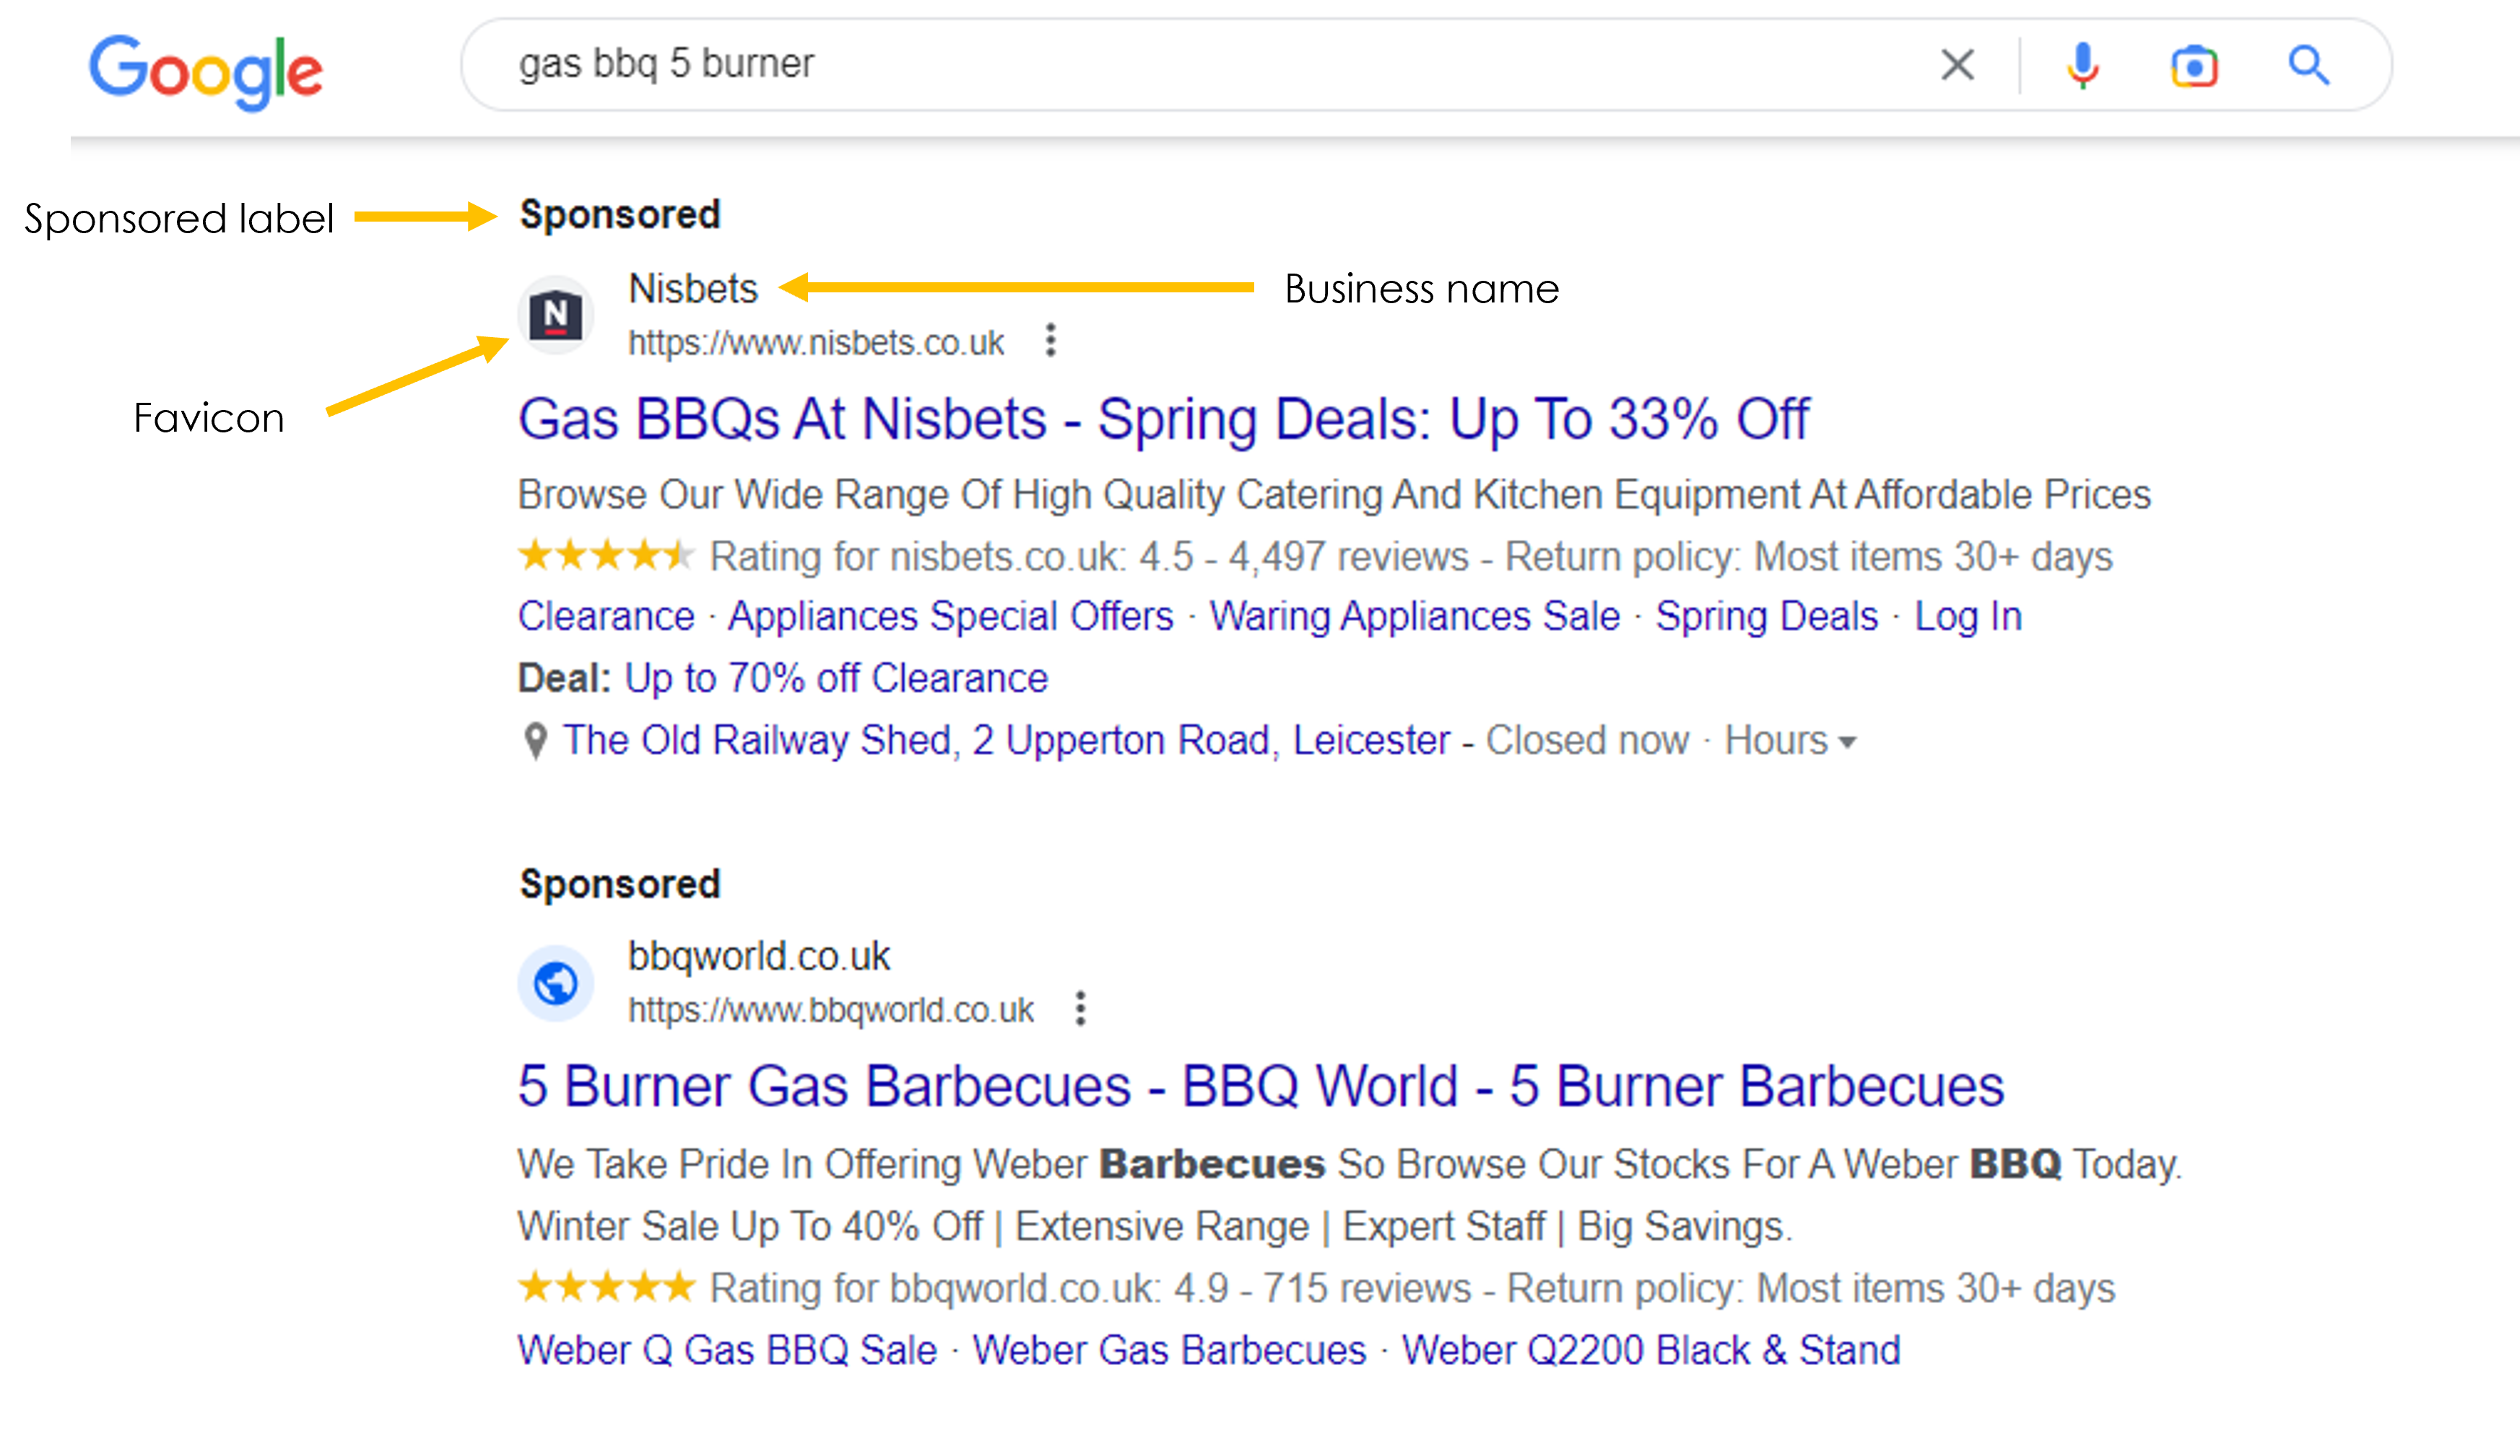 google search showing business name and favicon